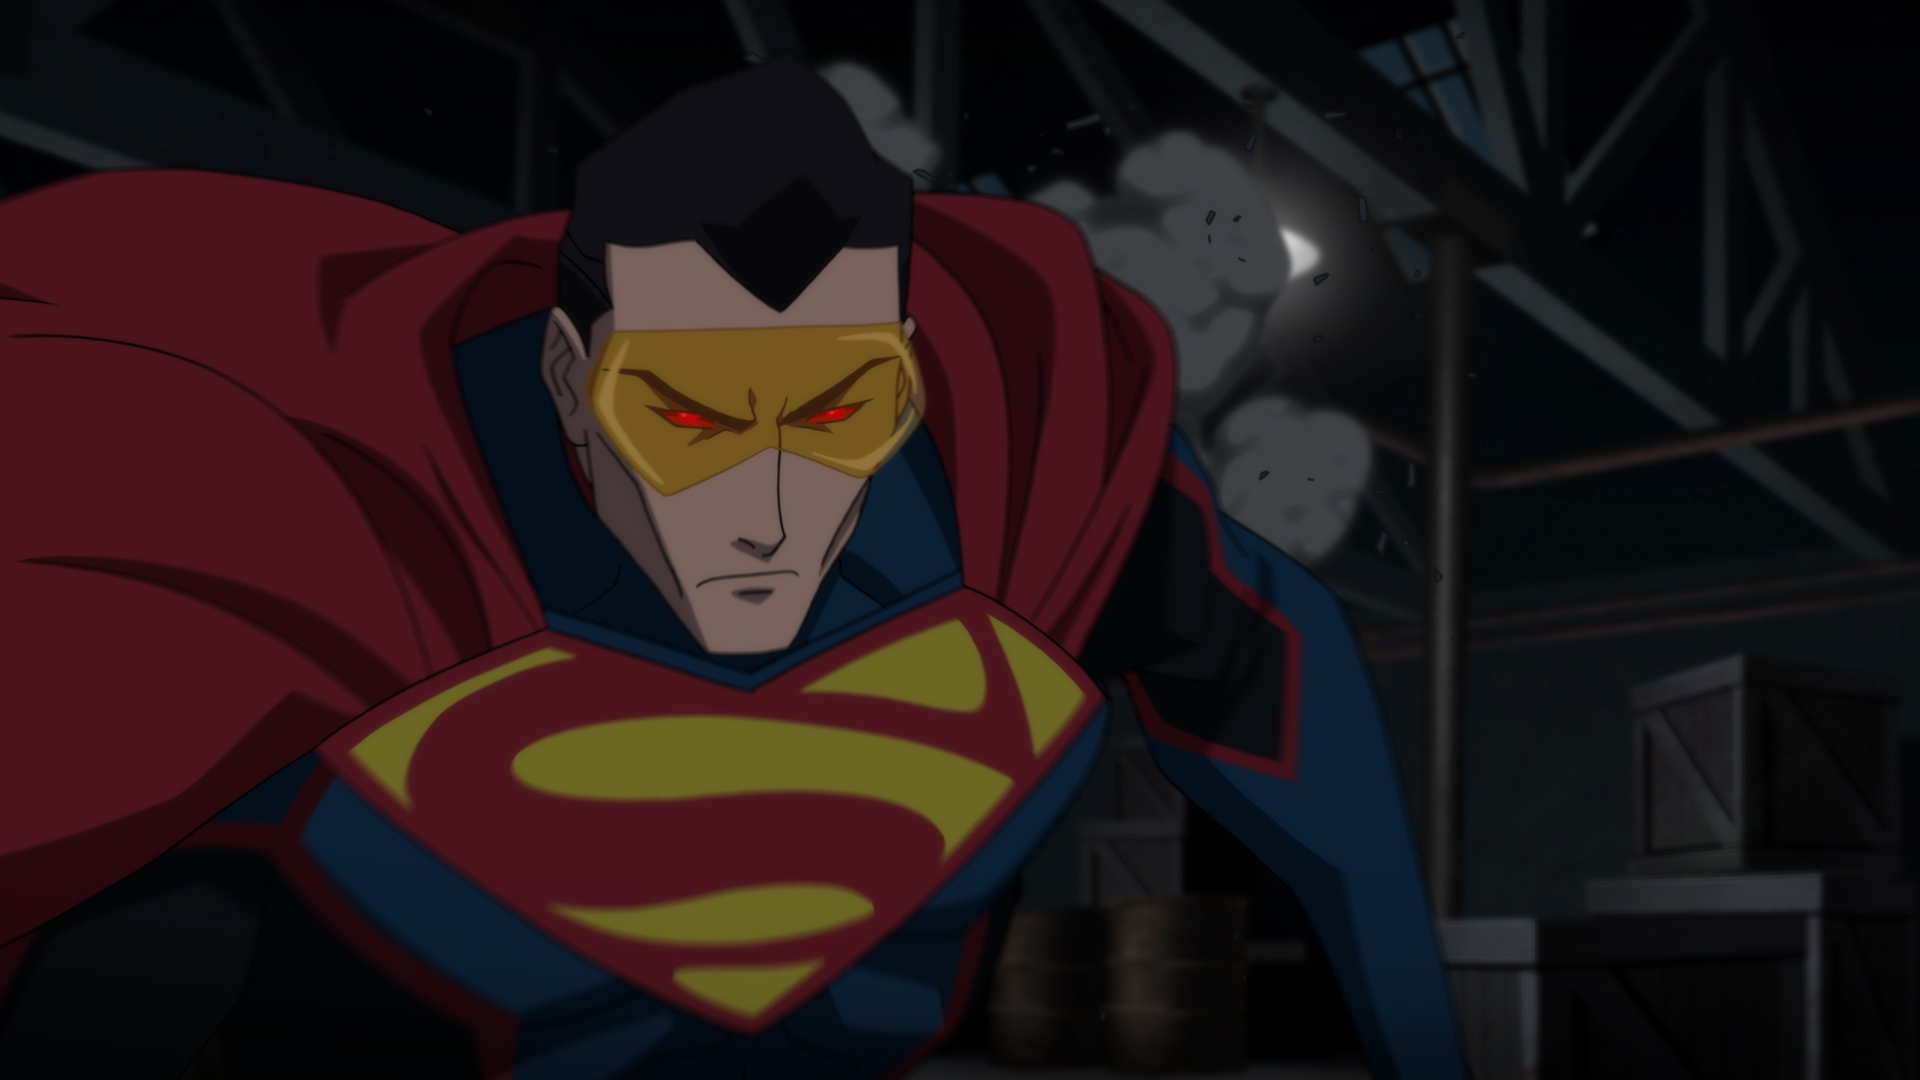 Cyborg Superman In Reign Of The Supermen Wallpapers